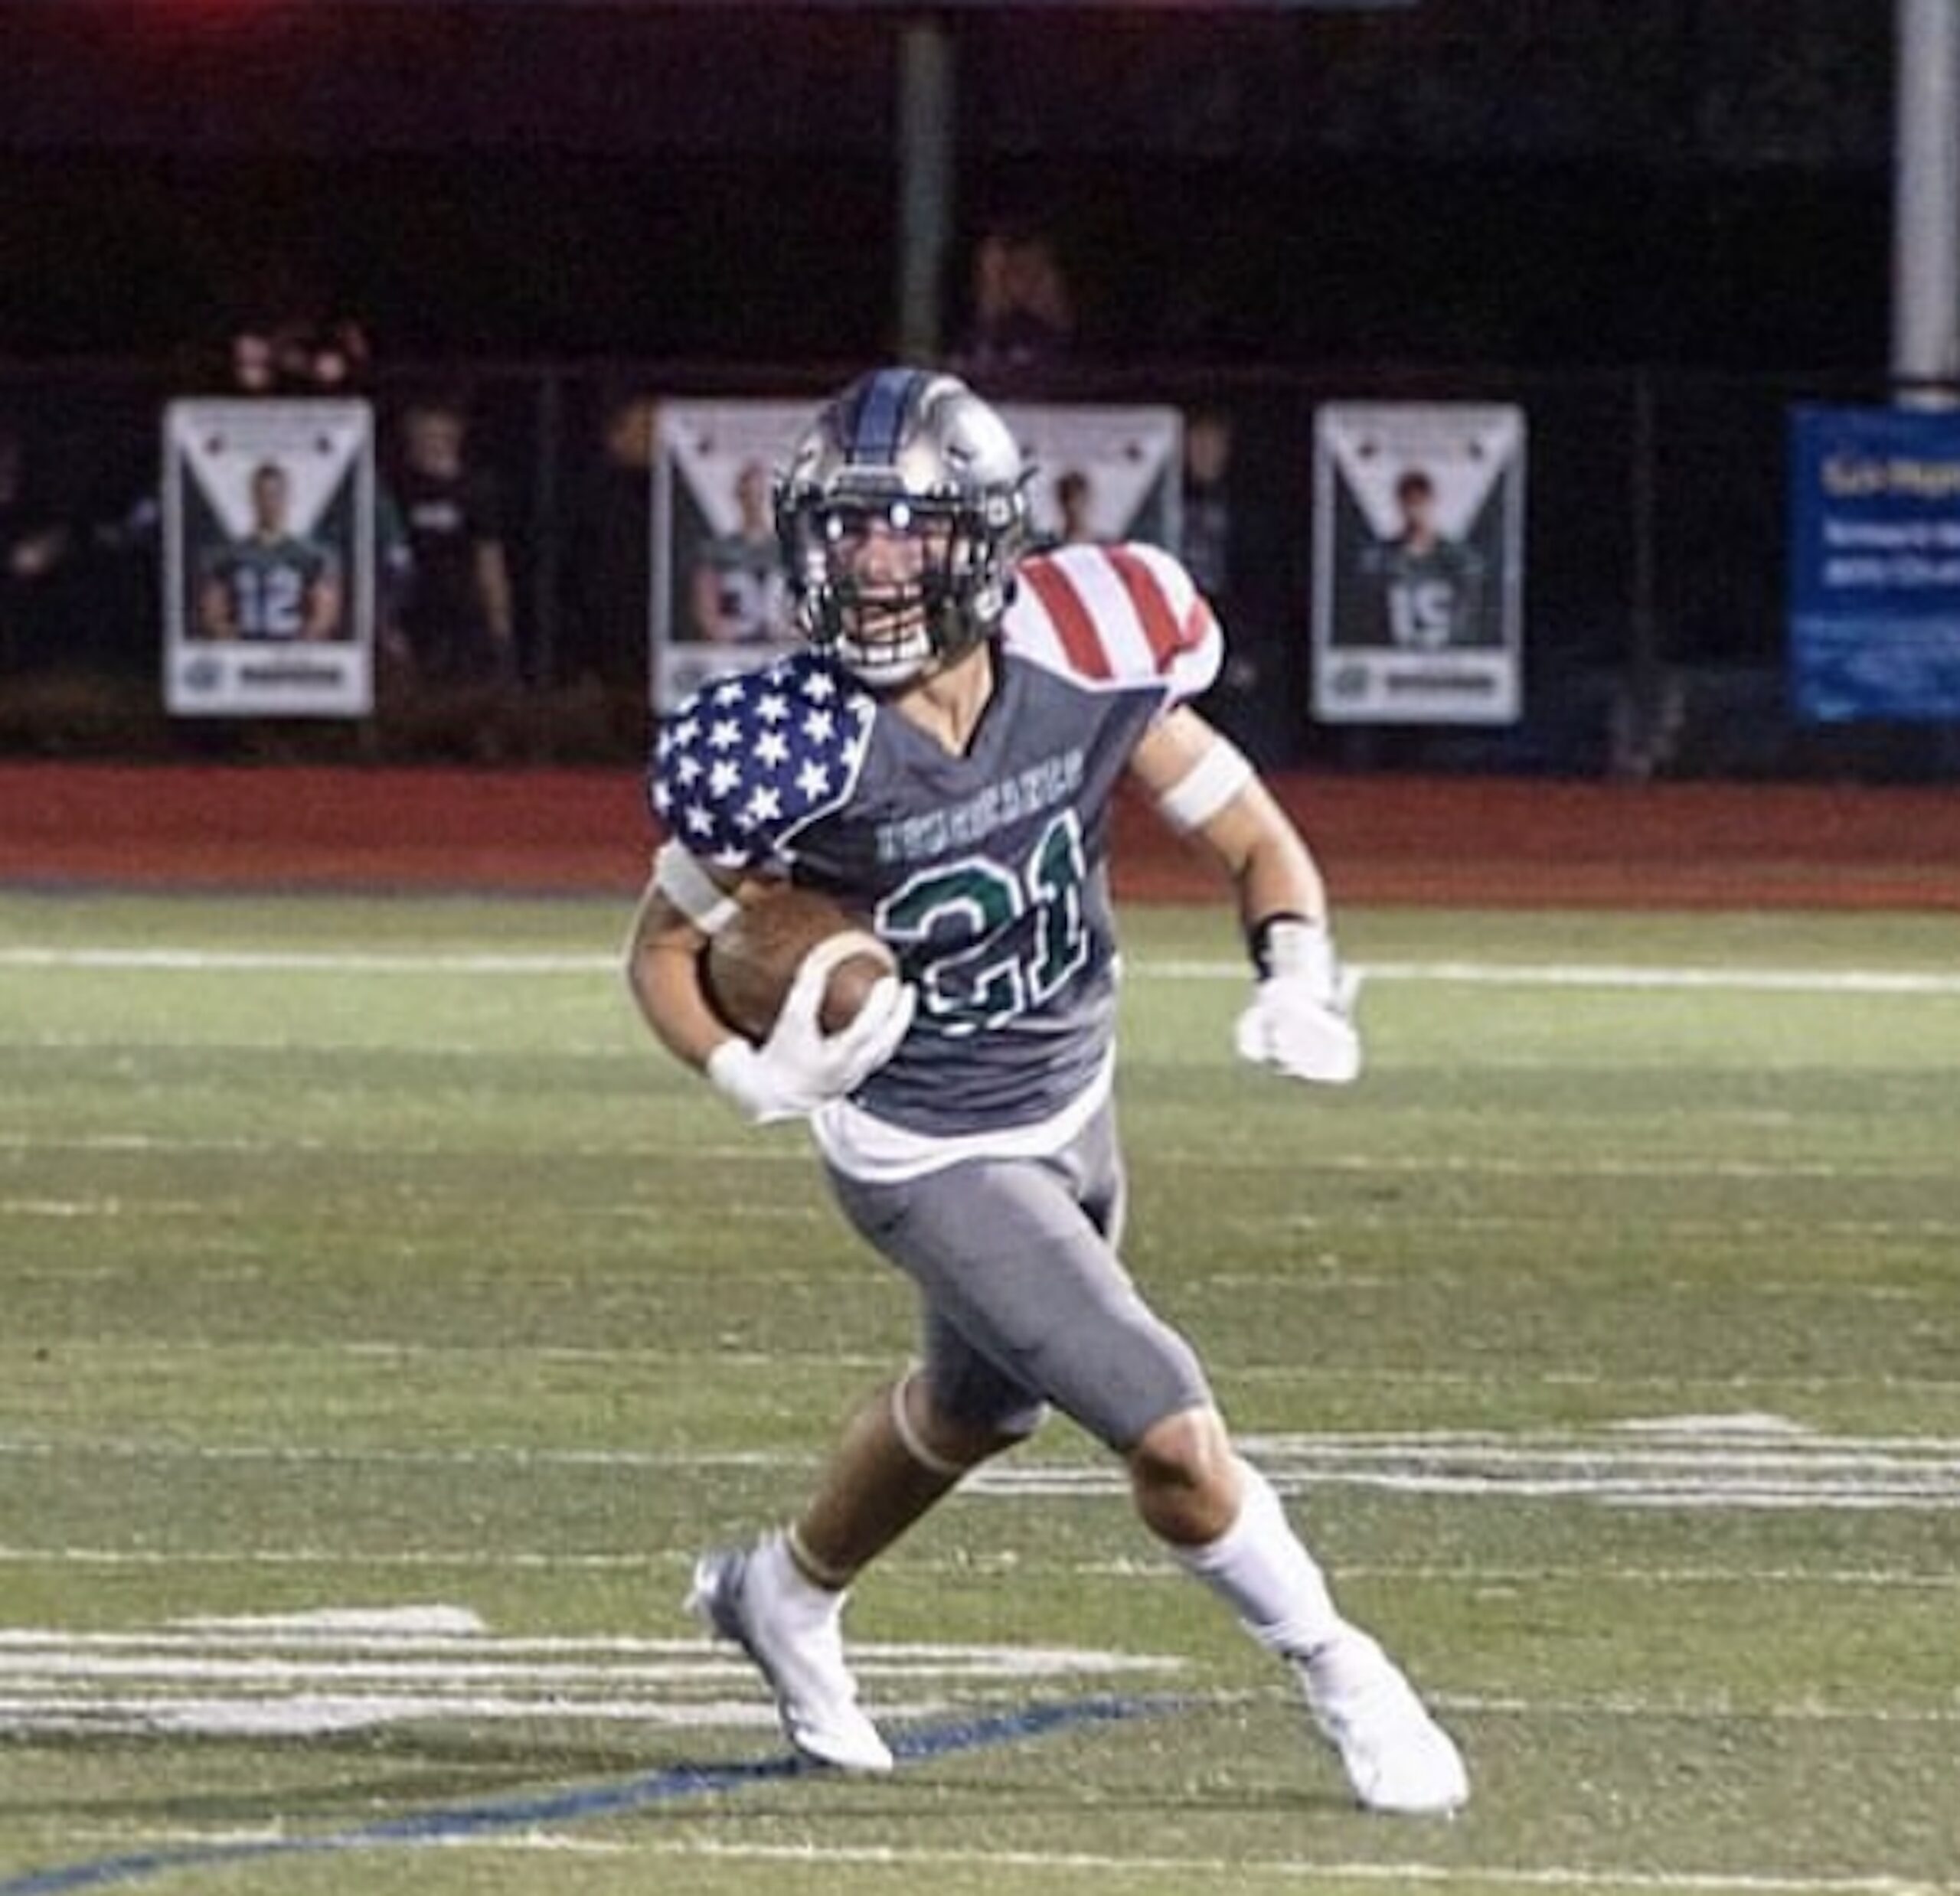 Sophomore running back Brody Schaffer, in a game this season, rushed for 98 yards on three carries, returned a kickoff 90 yards for a touchdown in the third quarter, had an interception and made four tackles. FROM LAUREN SPIEGEL